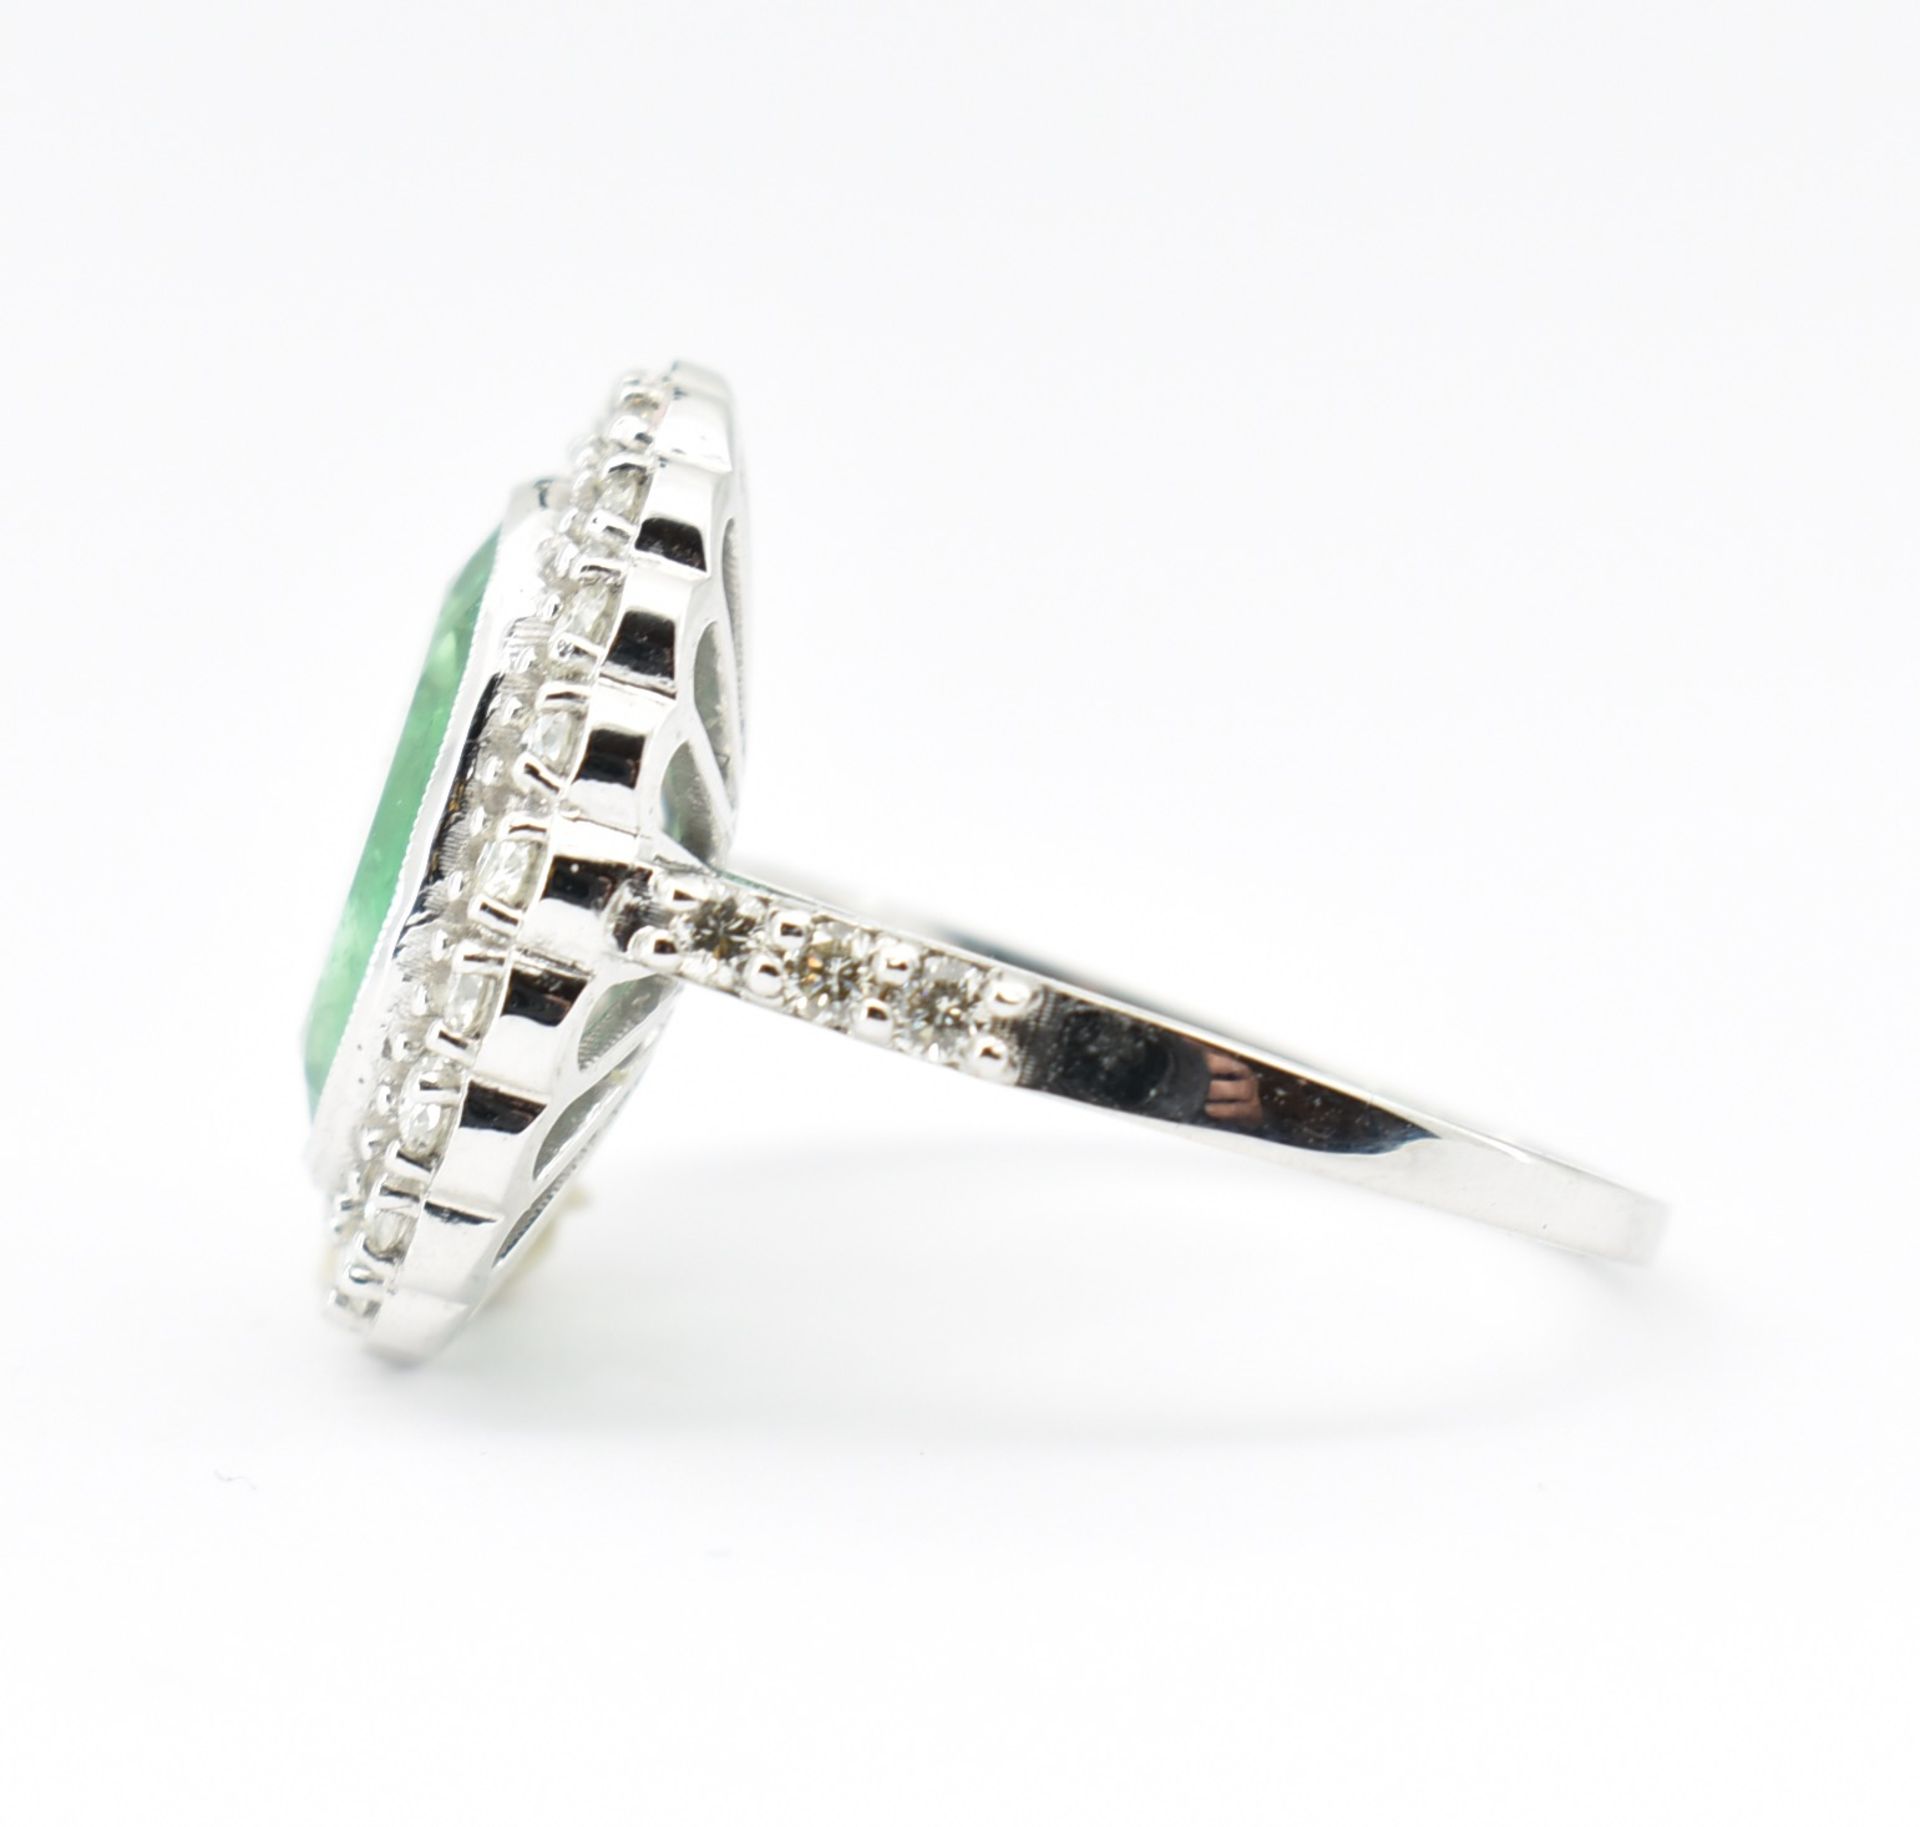 EMERALD & DIAMOND CLUSTER RING - Image 3 of 4